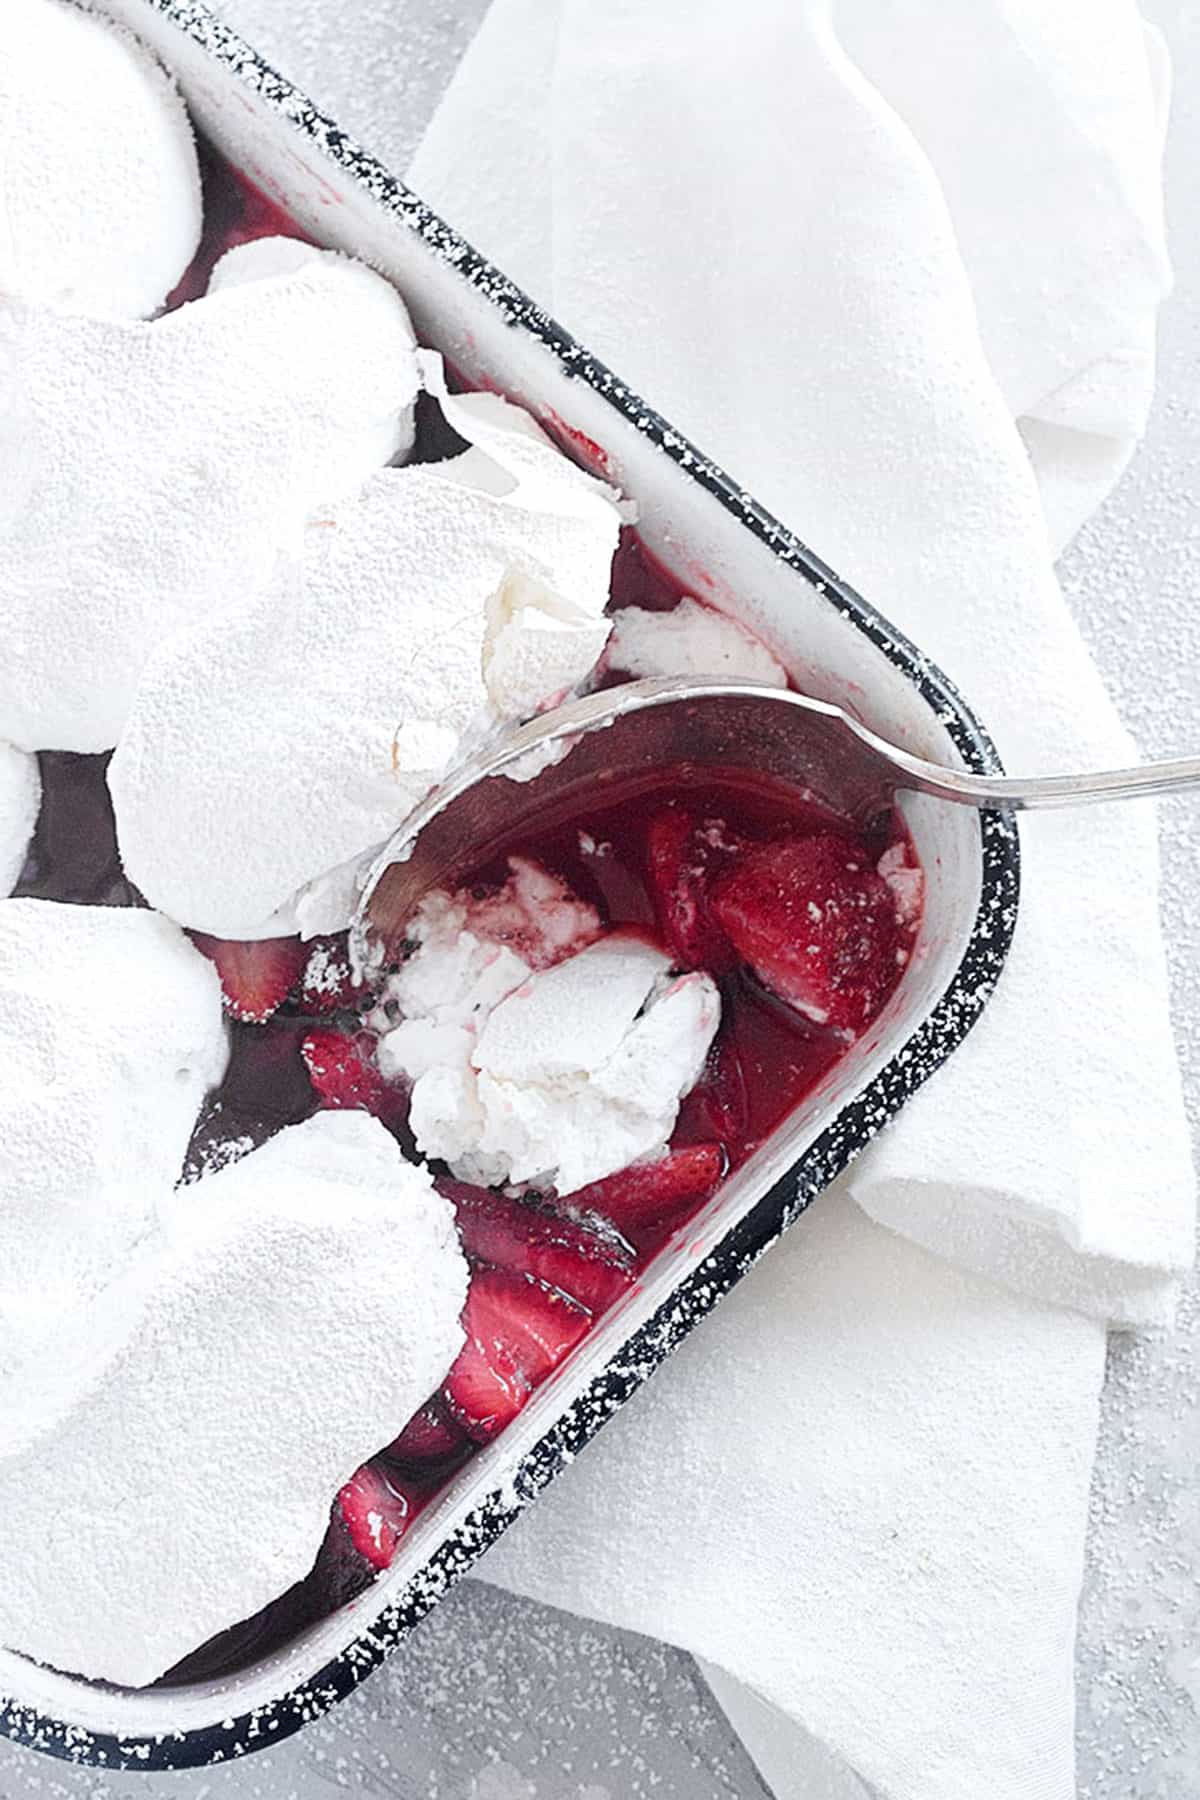 roasted strawberries with meringue topping in baking dish with spoon